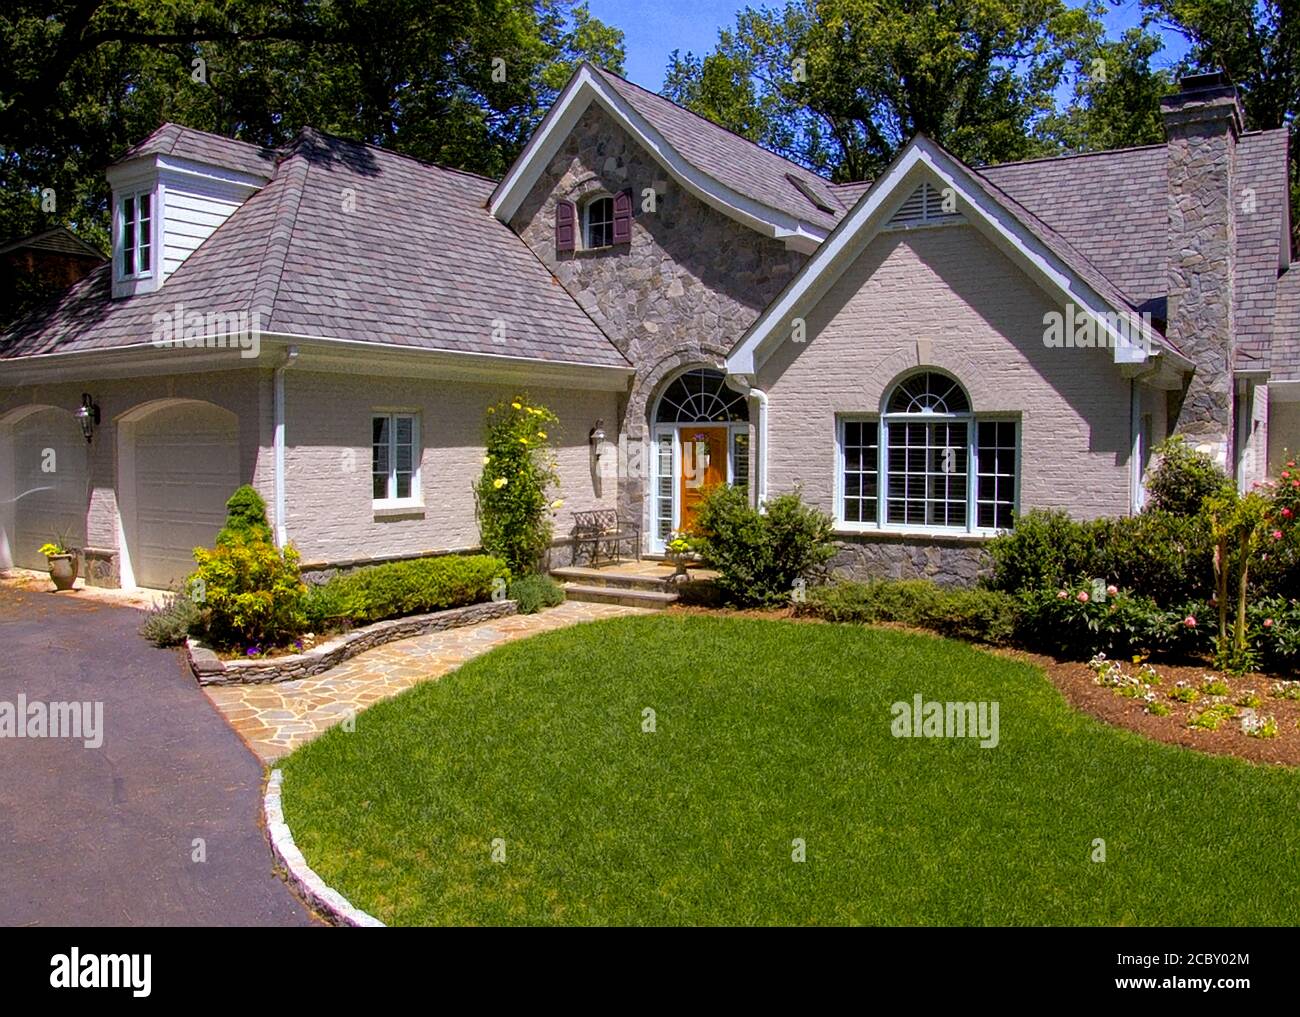 Multiple Angled Roofs-Front of Suburban house Stock Photo